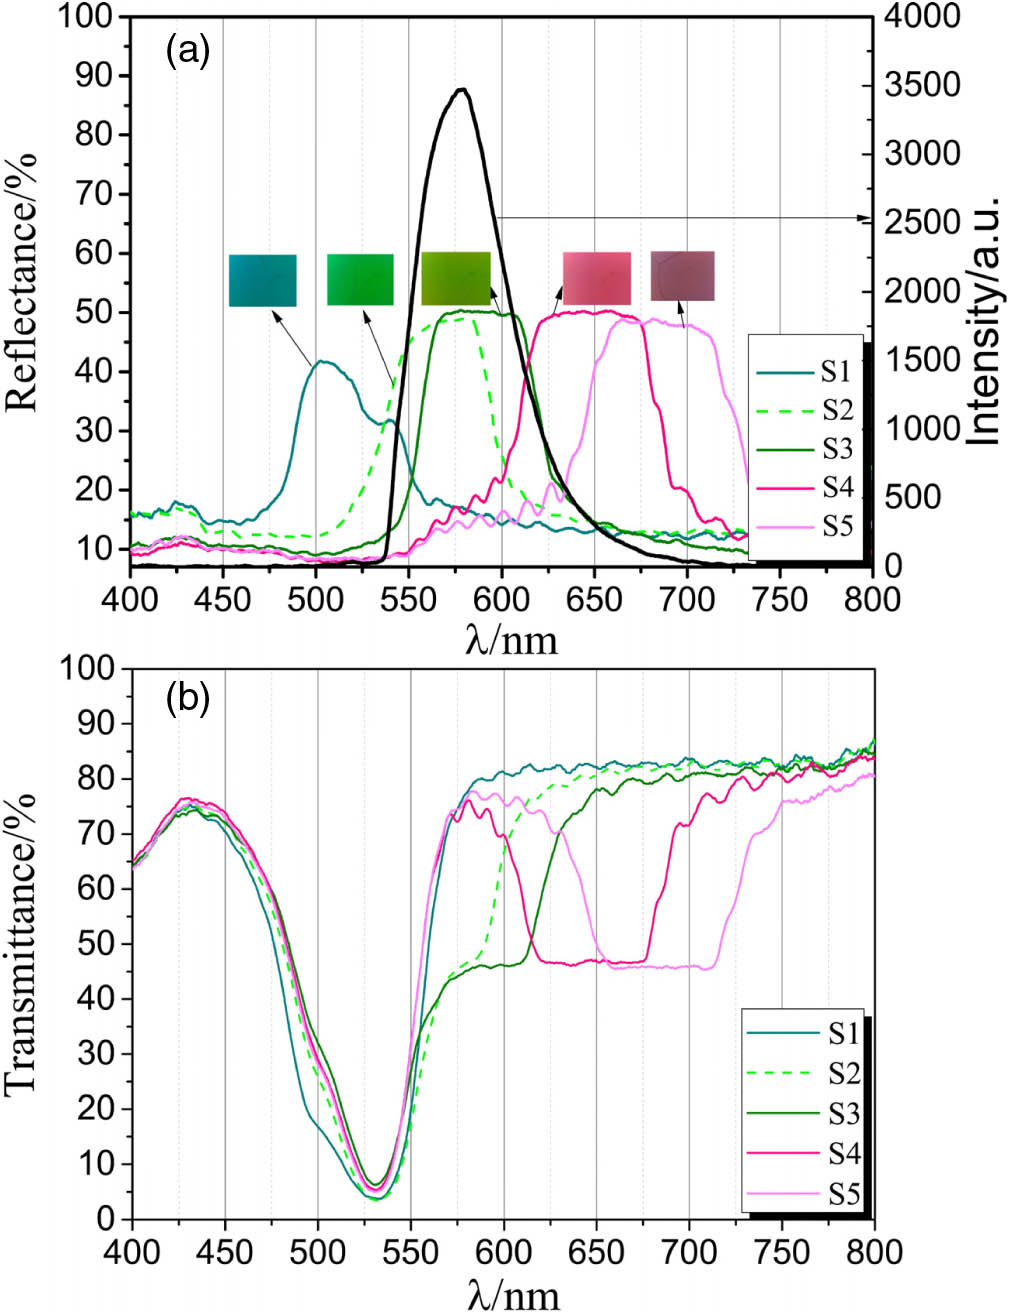 (a) Reflection spectra and (b) transmission spectra for dye-doped planarly oriented CLC samples with different concentrations of the chiral agent CB15. The black solid curve is the fluorescence spectrum of PM597.